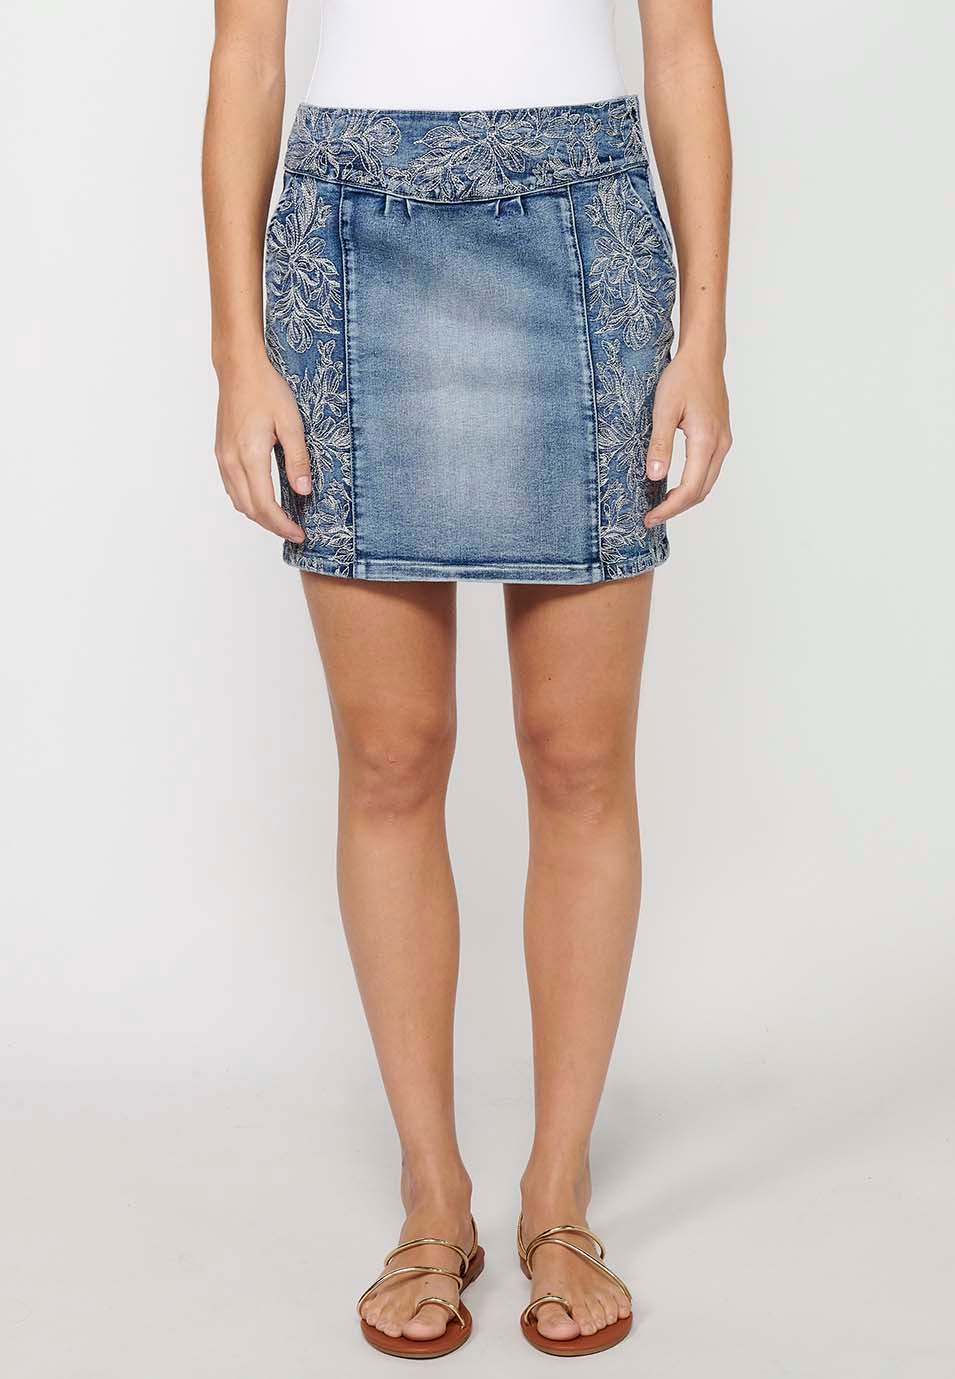 Short denim skirt with wide embroidered waist and floral embroidered details with side zipper closure in Blue for Women 1